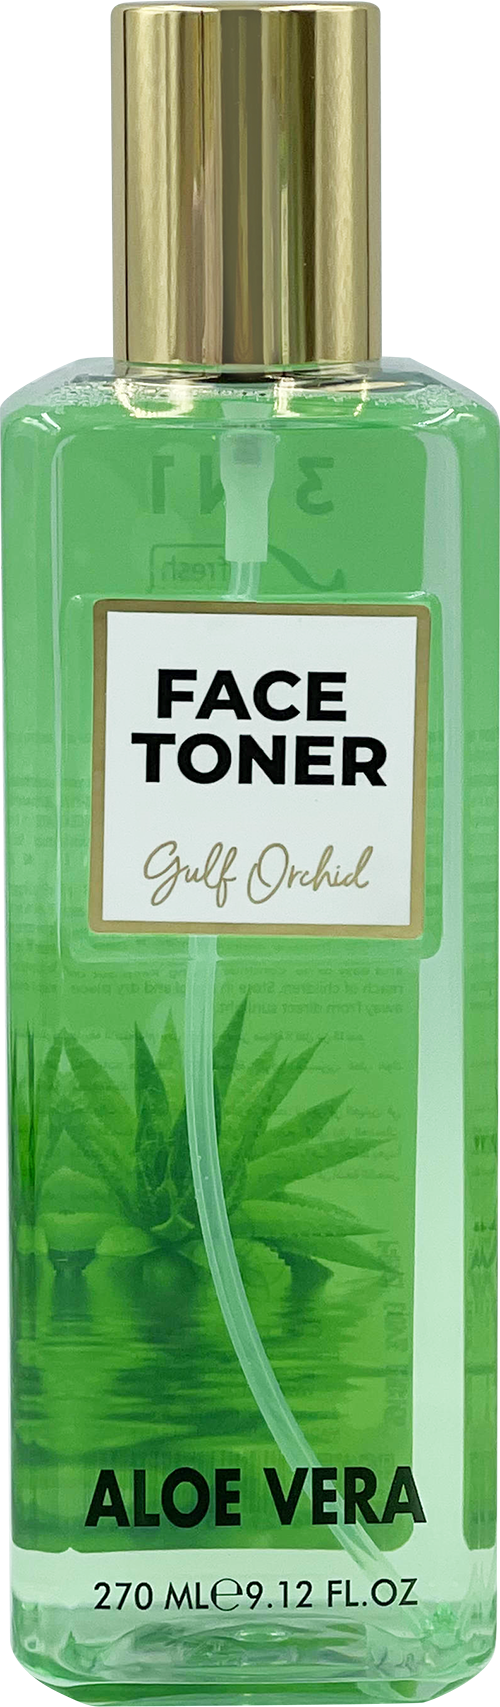 Gulf Orchid Face Toner